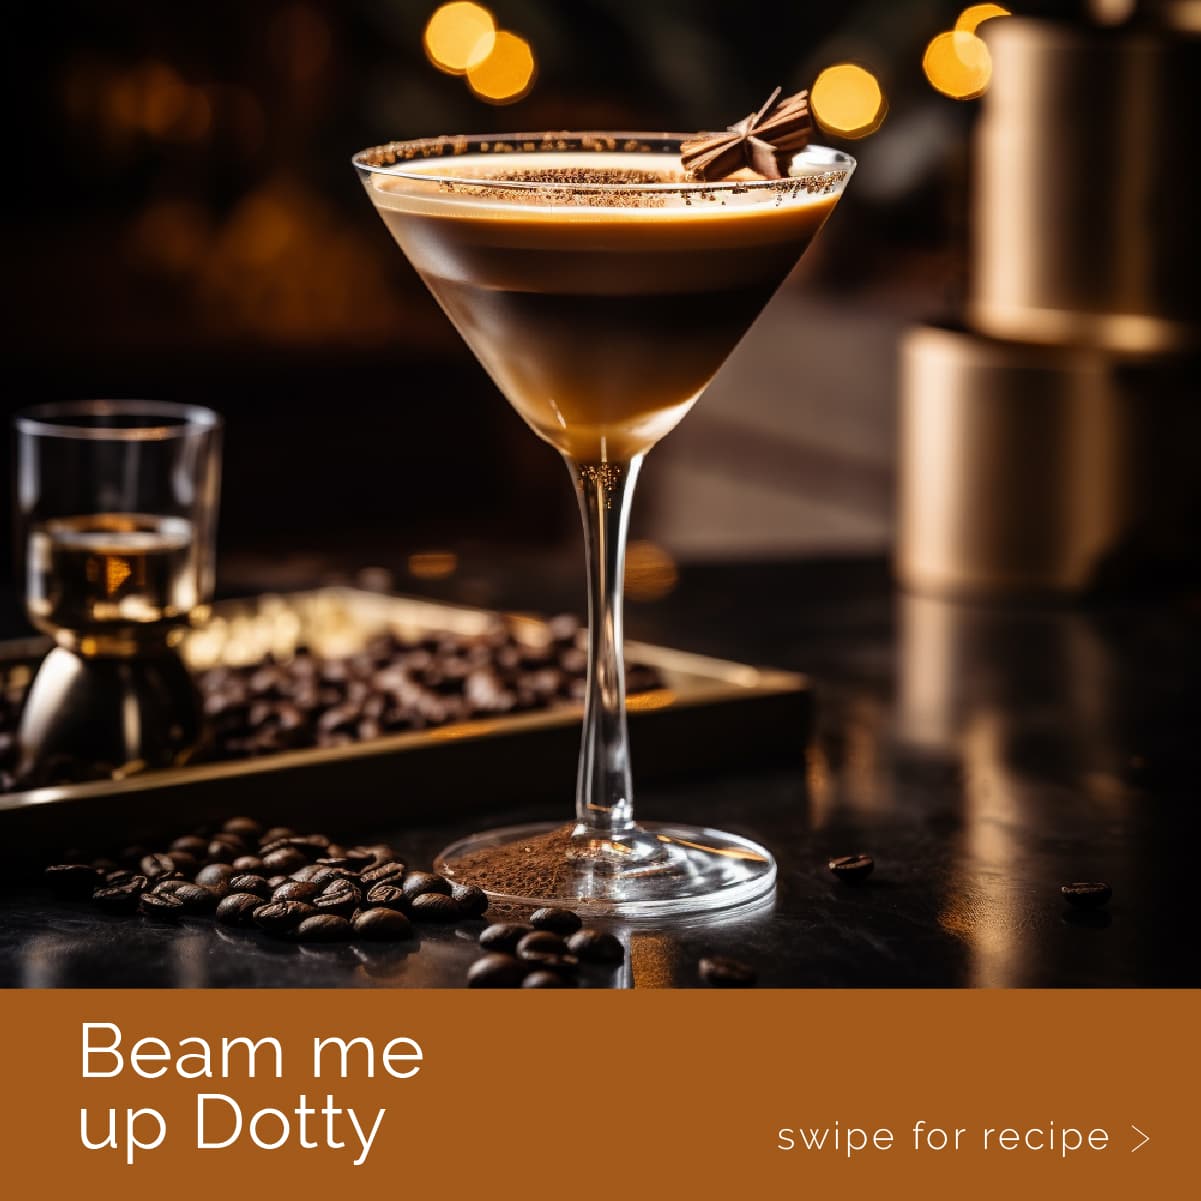 A Beam me up Dotty cocktail